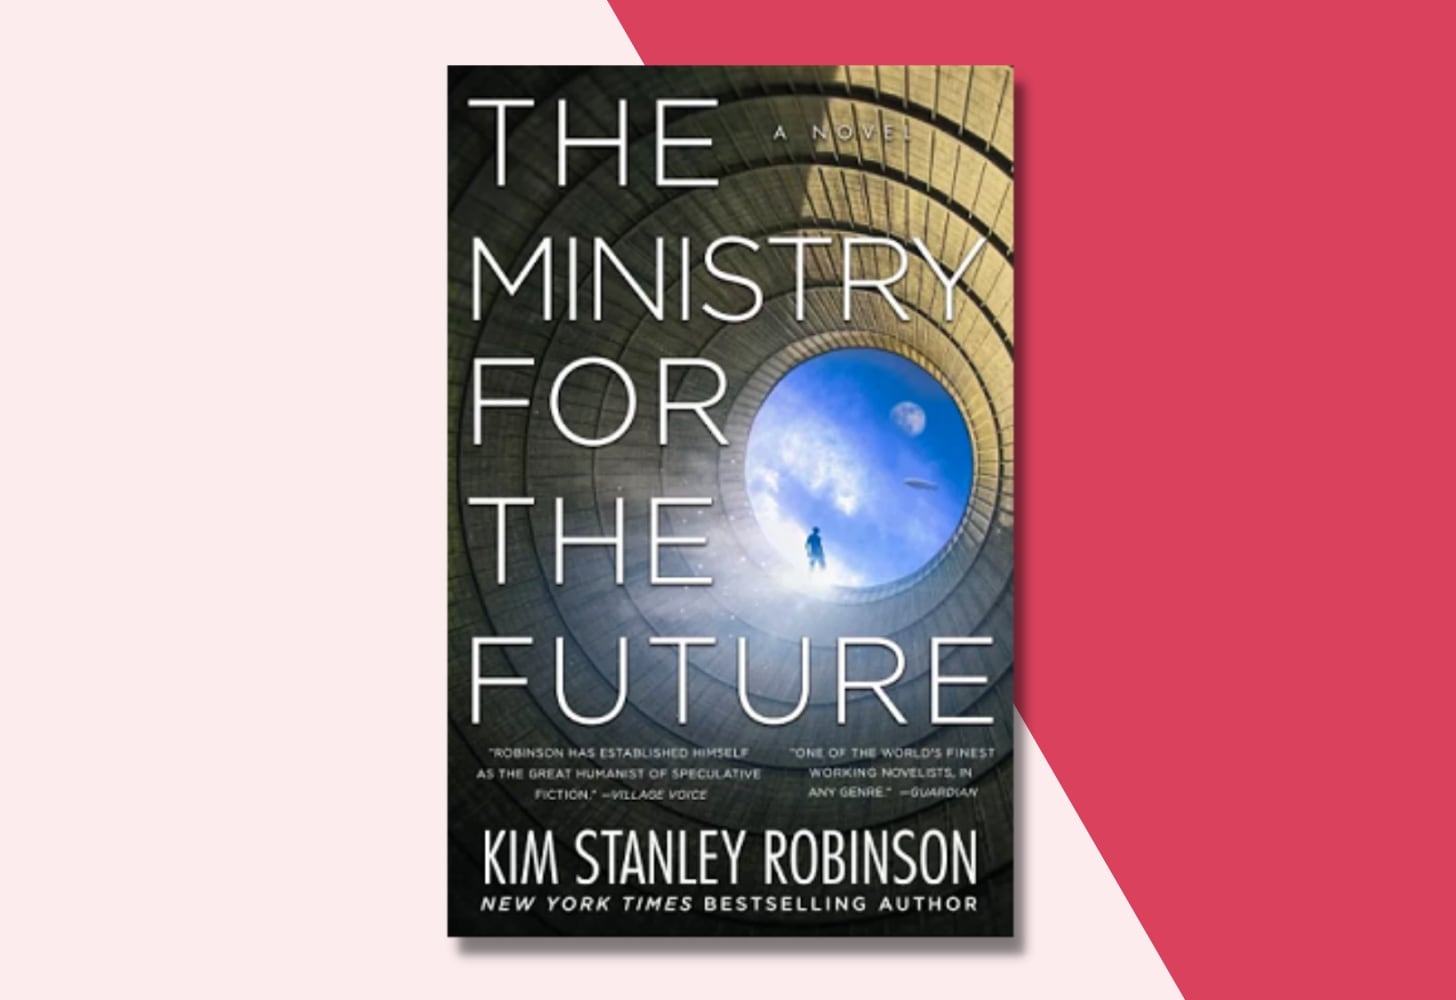 “The Ministry for the Future: A Novel” by Kim Stanley Robinson